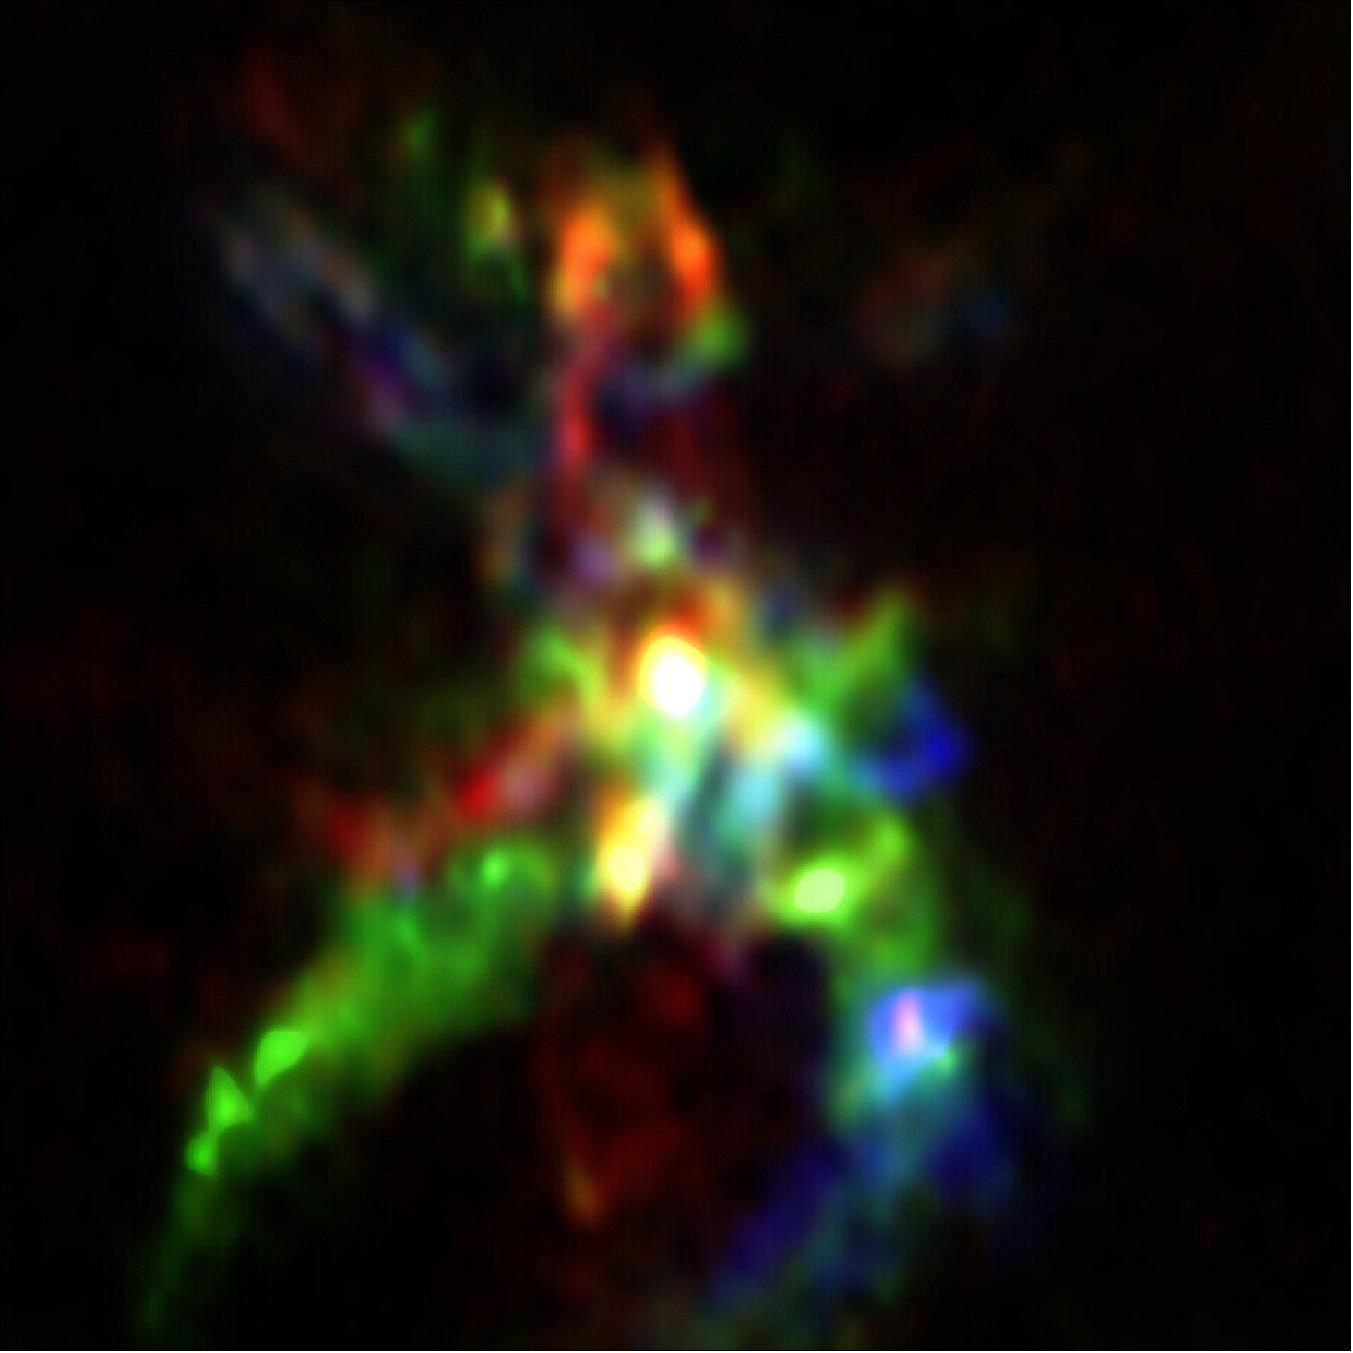 Figure 47: This ALMA image shows a detailed view of the star-forming region AFGL 5142. A bright, massive star in its infancy is visible at the center of the image. The flows of gas from this star have opened up a cavity in the region, and it is in the walls of this cavity (shown in color), that phosphorus-bearing molecules like phosphorus monoxide are formed. The different colors represent material moving at different speeds. A joint study linking the presence of phosphorus monoxide in this star-forming region with analogous observations performed by the Rosetta mission at Comet 67P/Churyumov–Gerasimenko showed how this compound may have played a crucial role in starting life on our planet (image credit: ALMA (ESO/NAOJ/NRAO), Rivilla et al.)